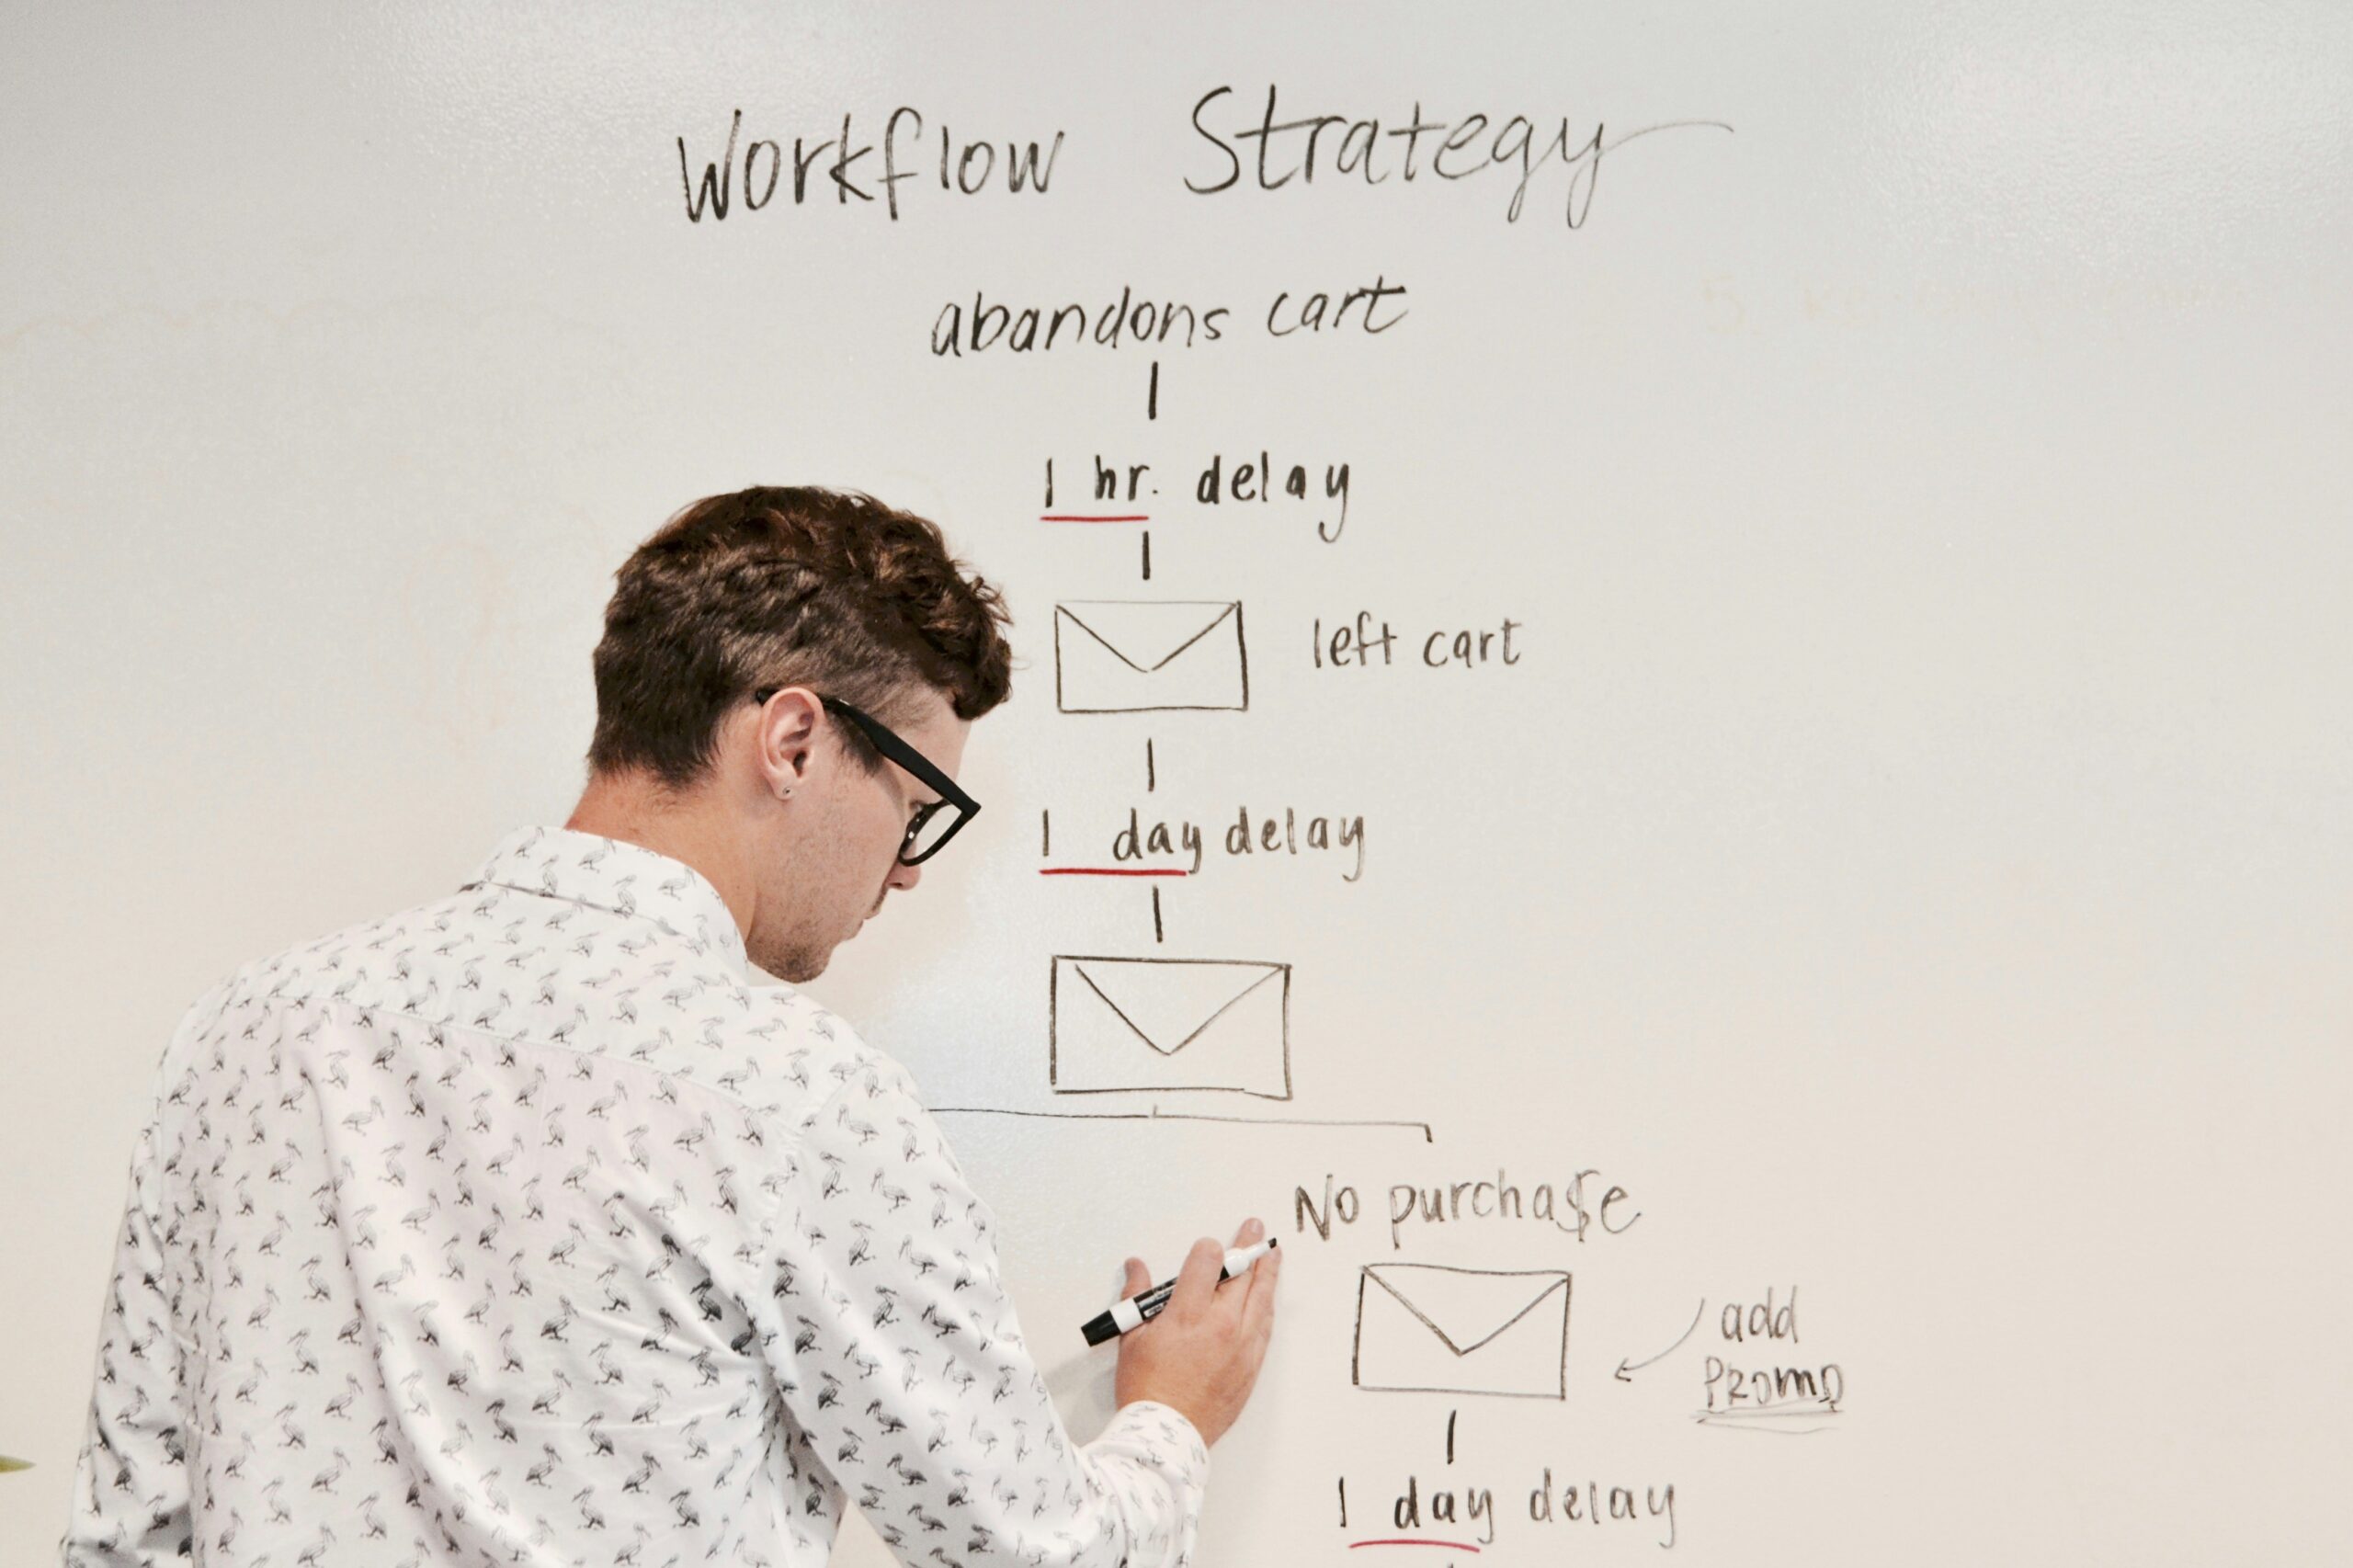 A person stands at a whiteboard, writing out a workflow strategy for abandoned carts, illustrating delays and actions using a flowchart, demonstrating possible use of BPA.